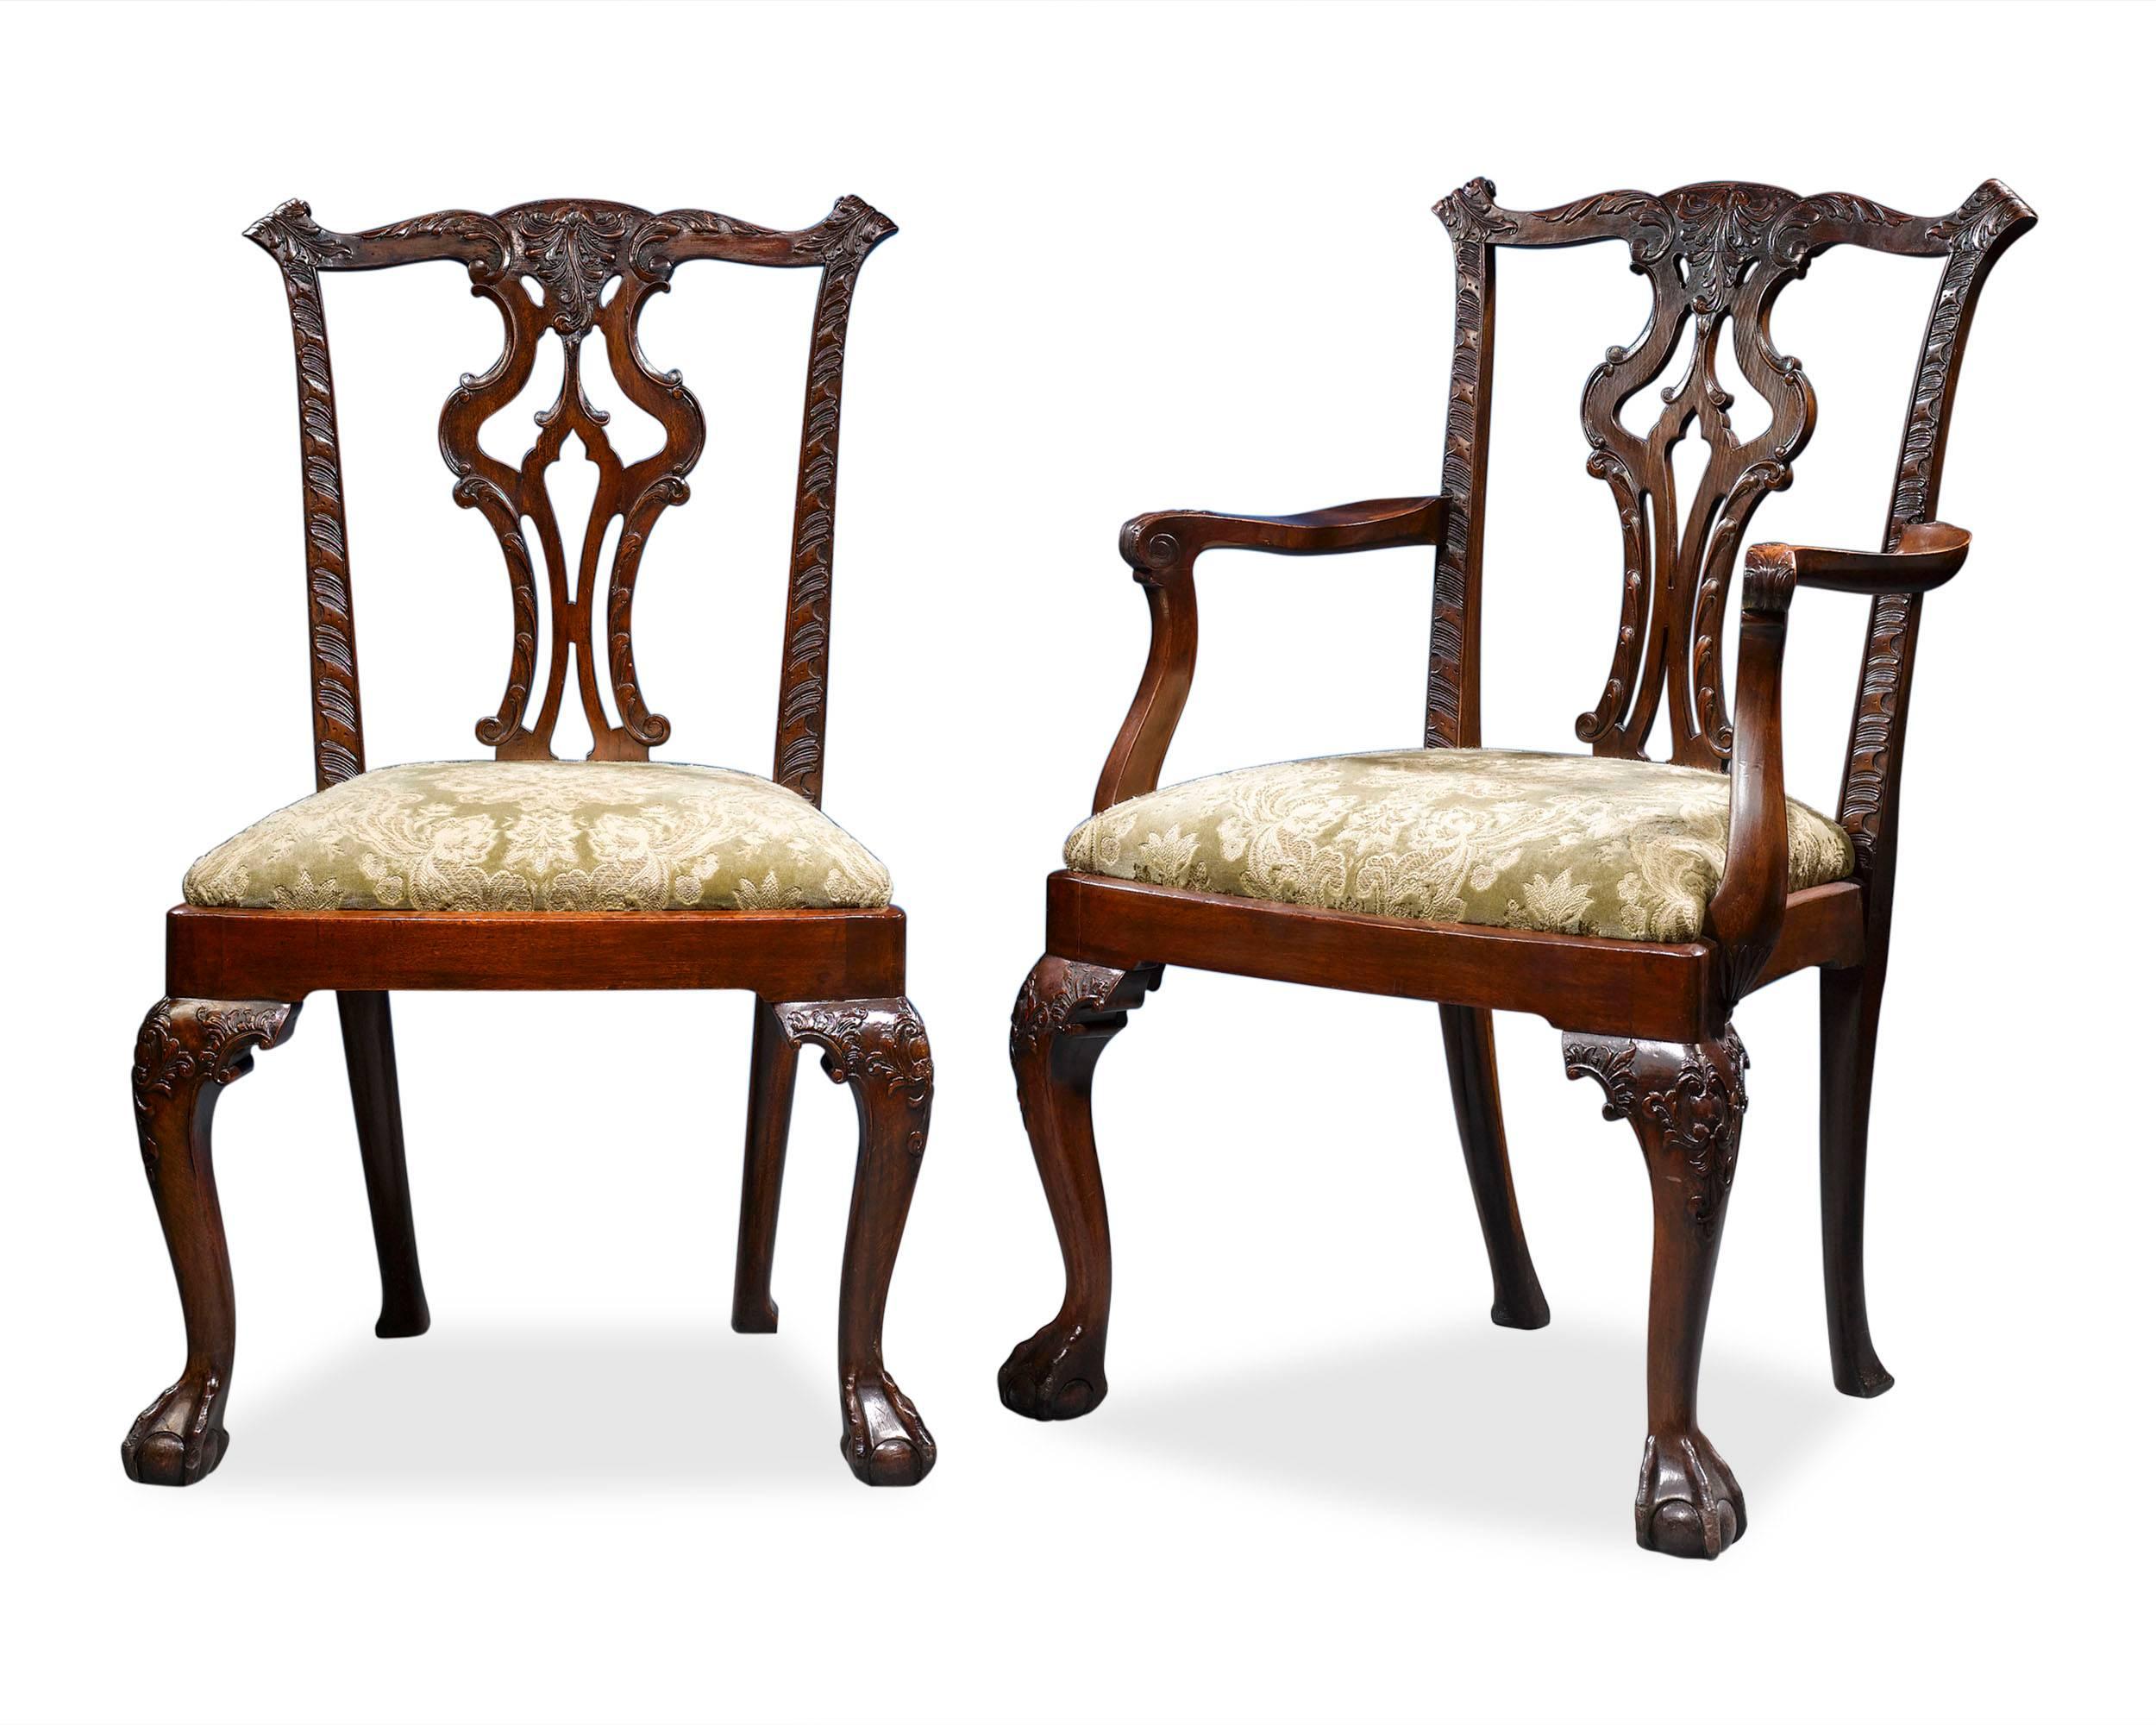 A fine set of ten 19th century English Chippendale style mahogany dining room chairs. The set includes eight side chairs and two armchairs. The front legs have carved ball and claw feet, 

circa 1880.